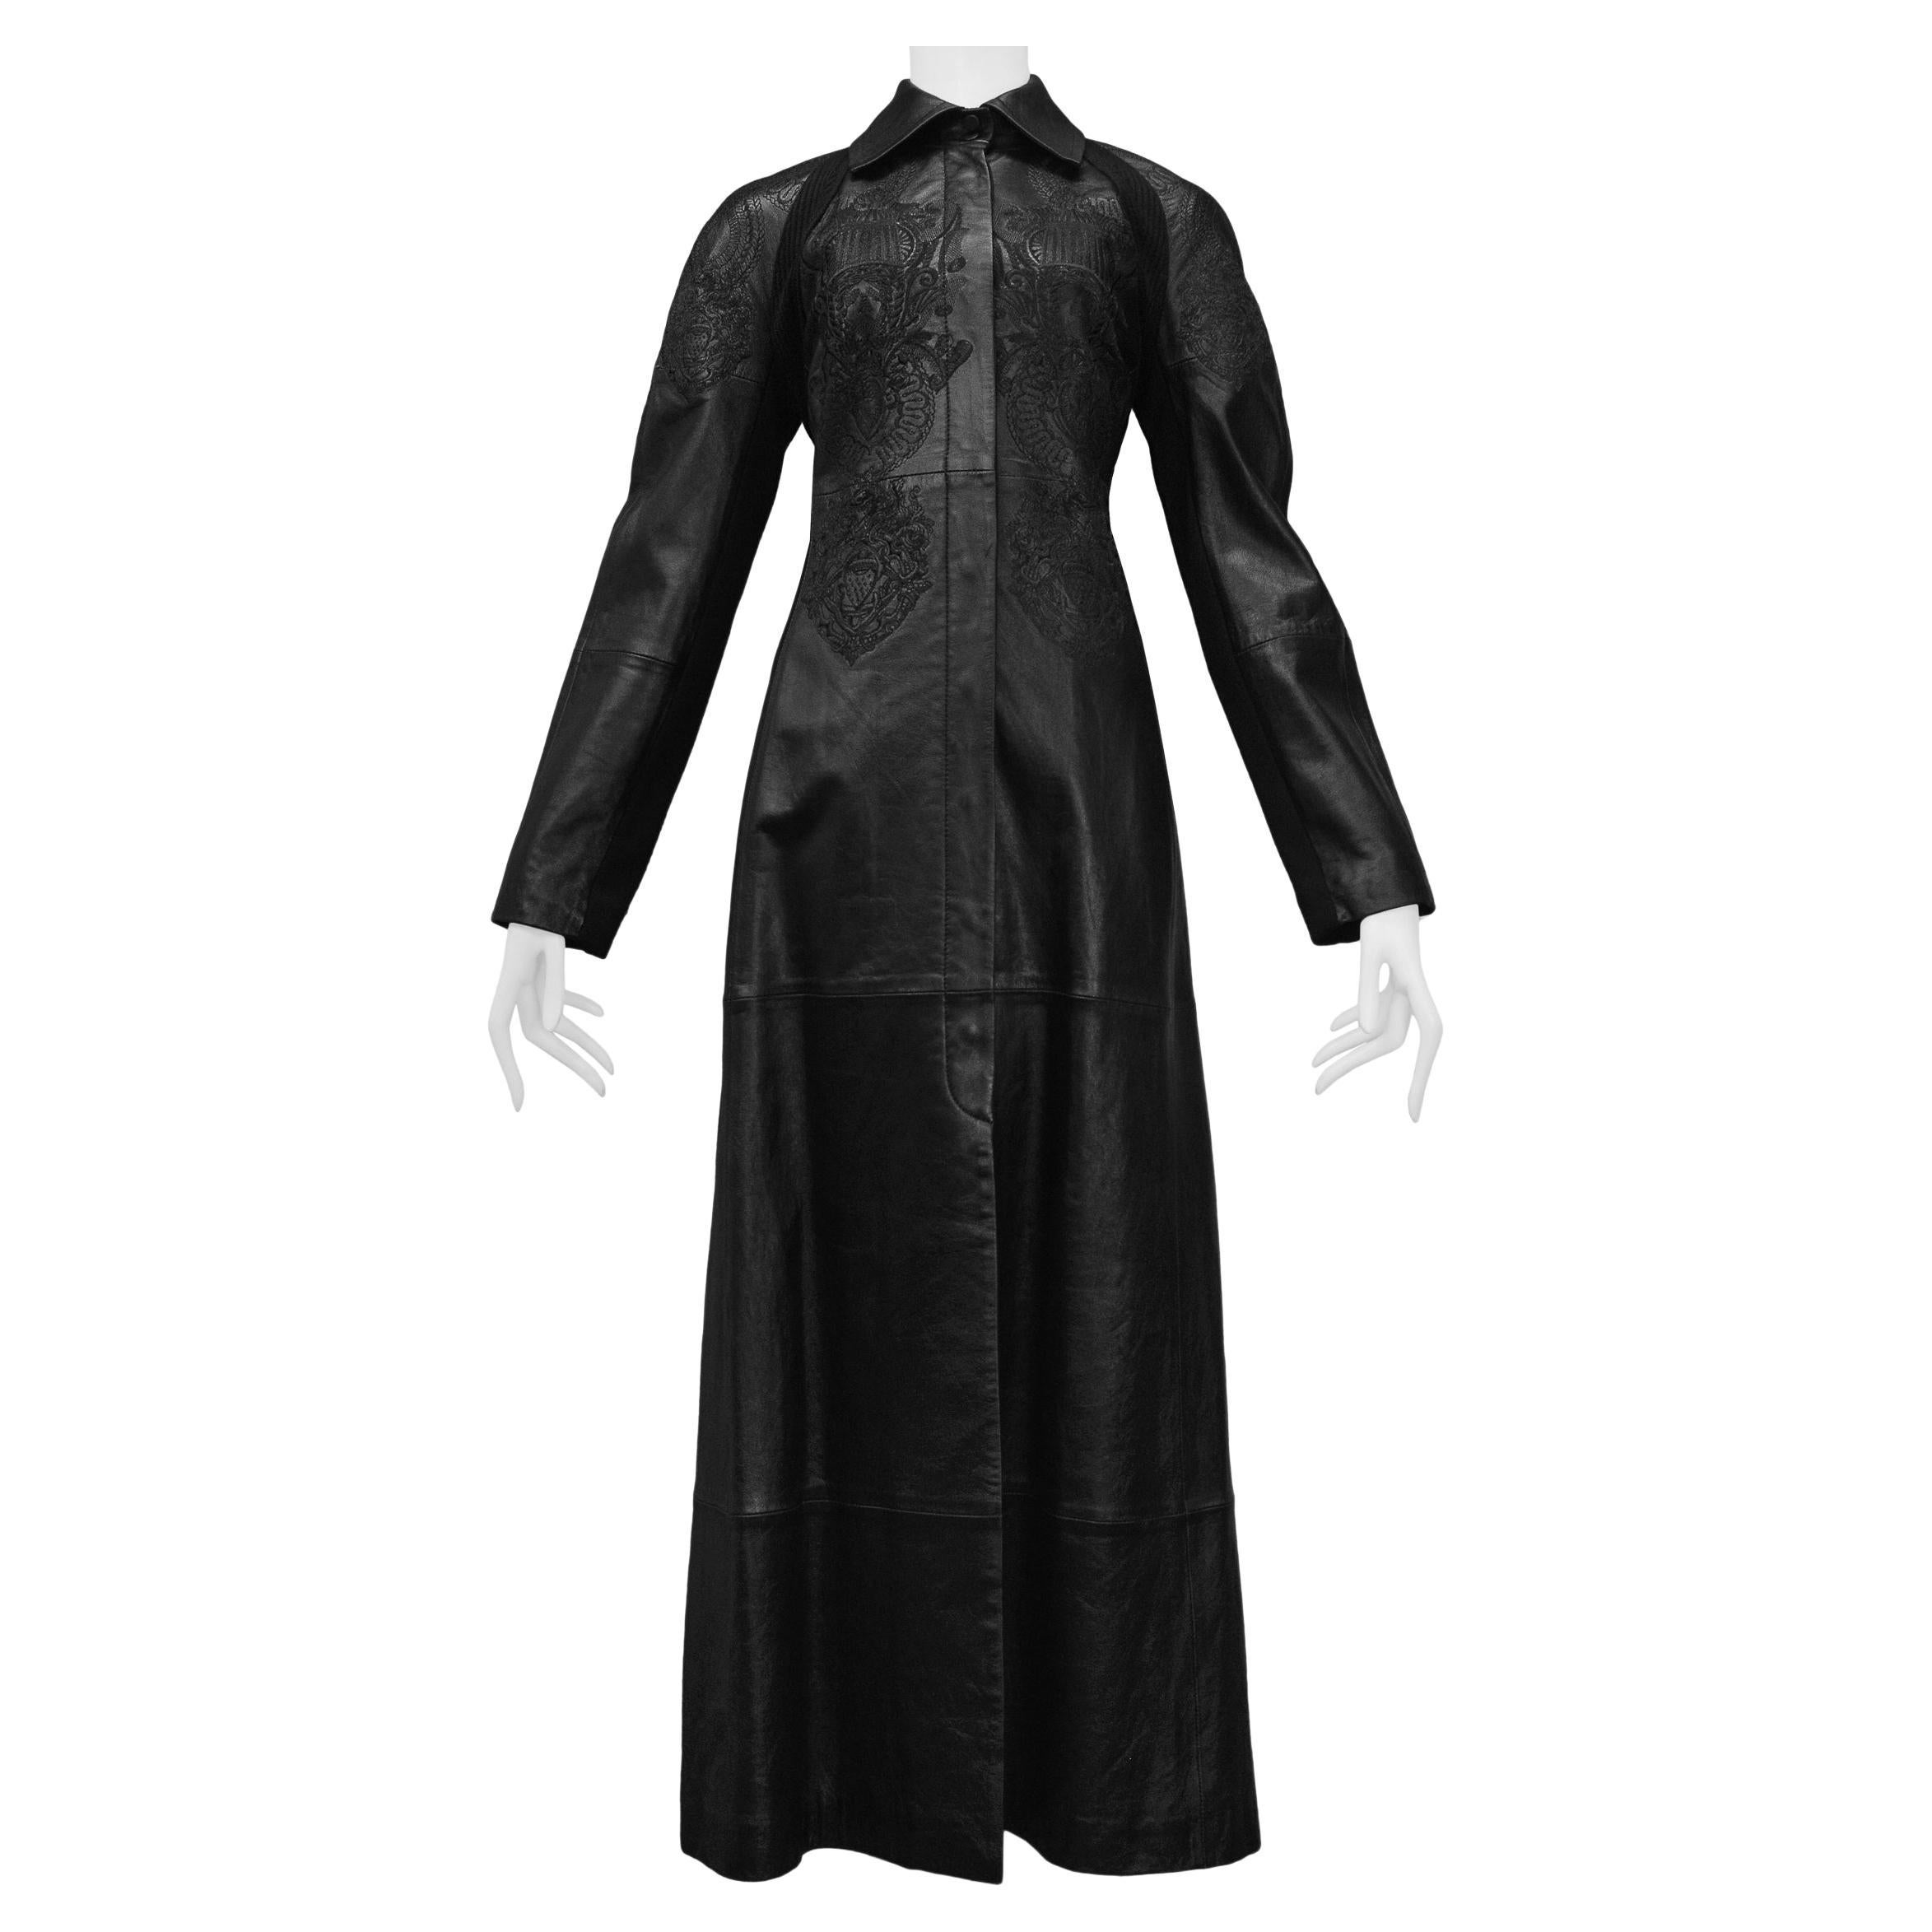 Gianfranco Ferre Long Black Leather Maxi Coat With Fancy Embroidery